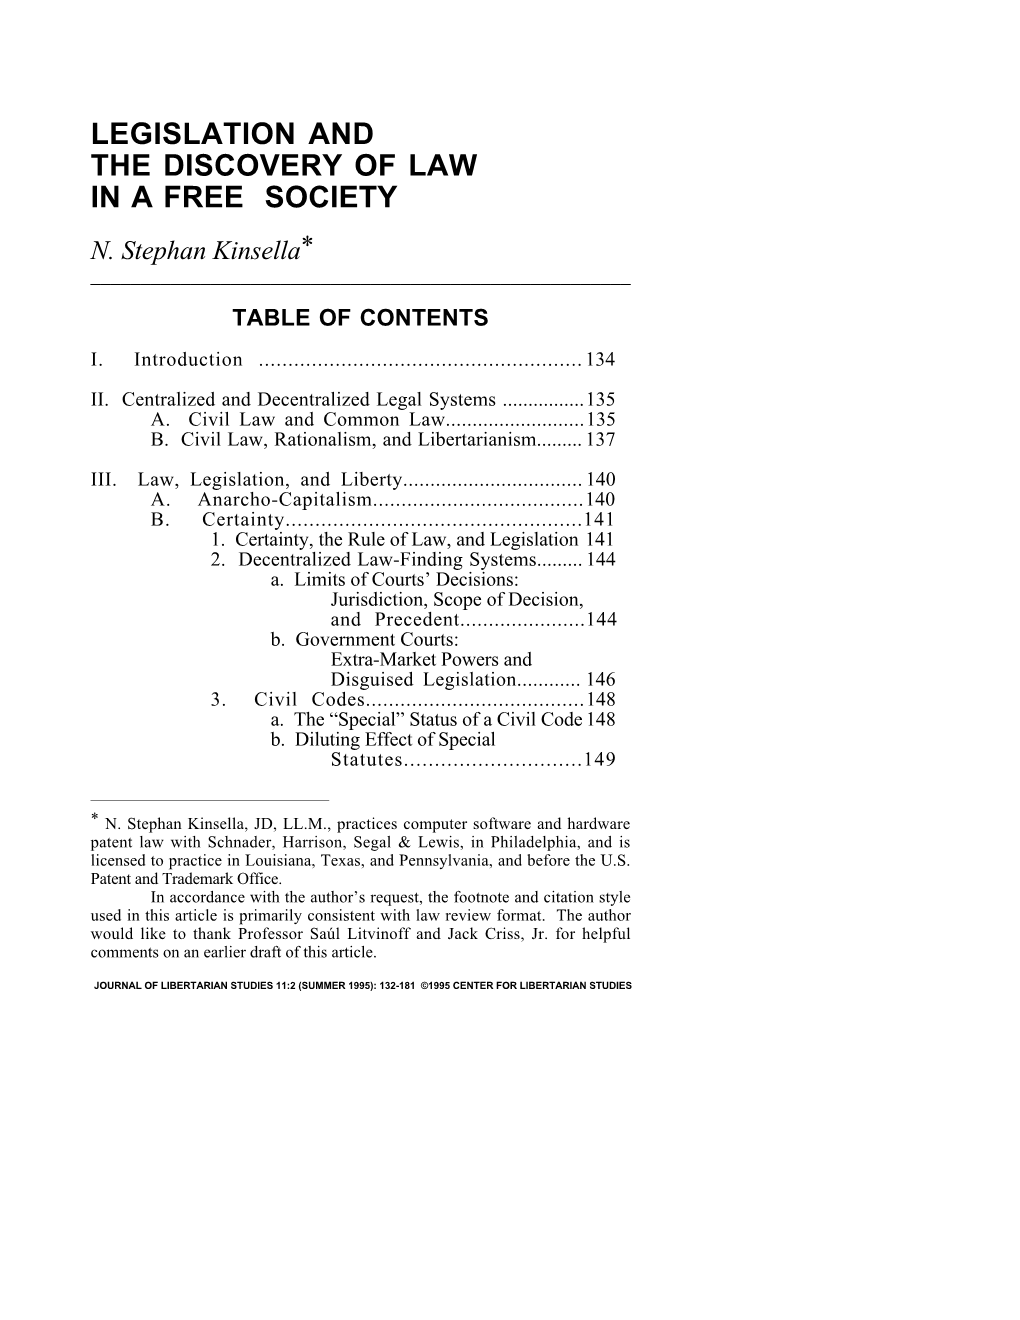 Legislation and the Discovery of Law in a Free Society N